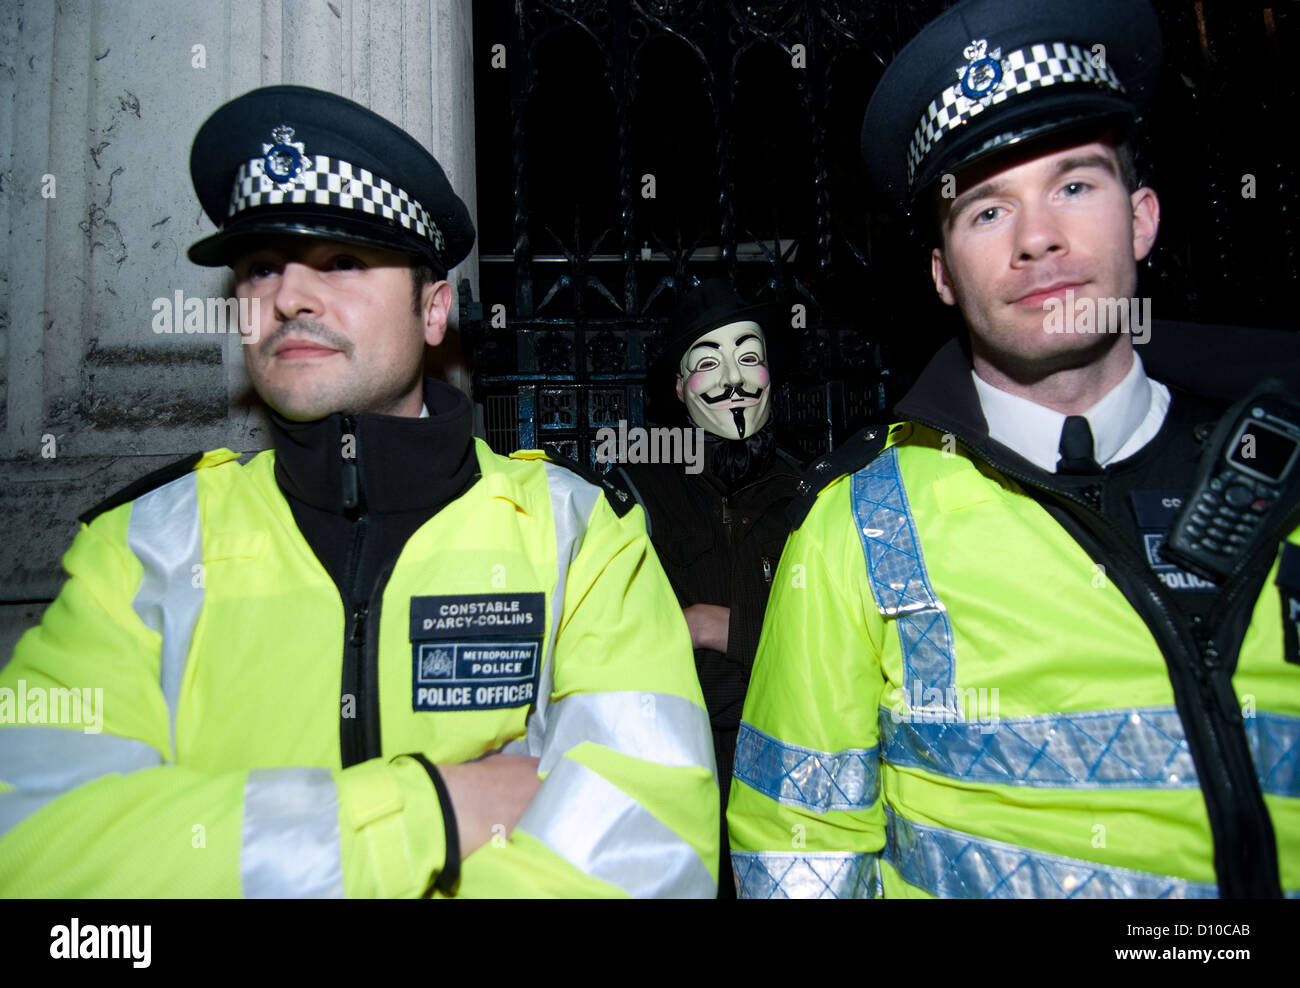 A 'Anonymous' protester stands behind police constables outside the Houses of Parliament during operation Vendetta protest Stock Photo